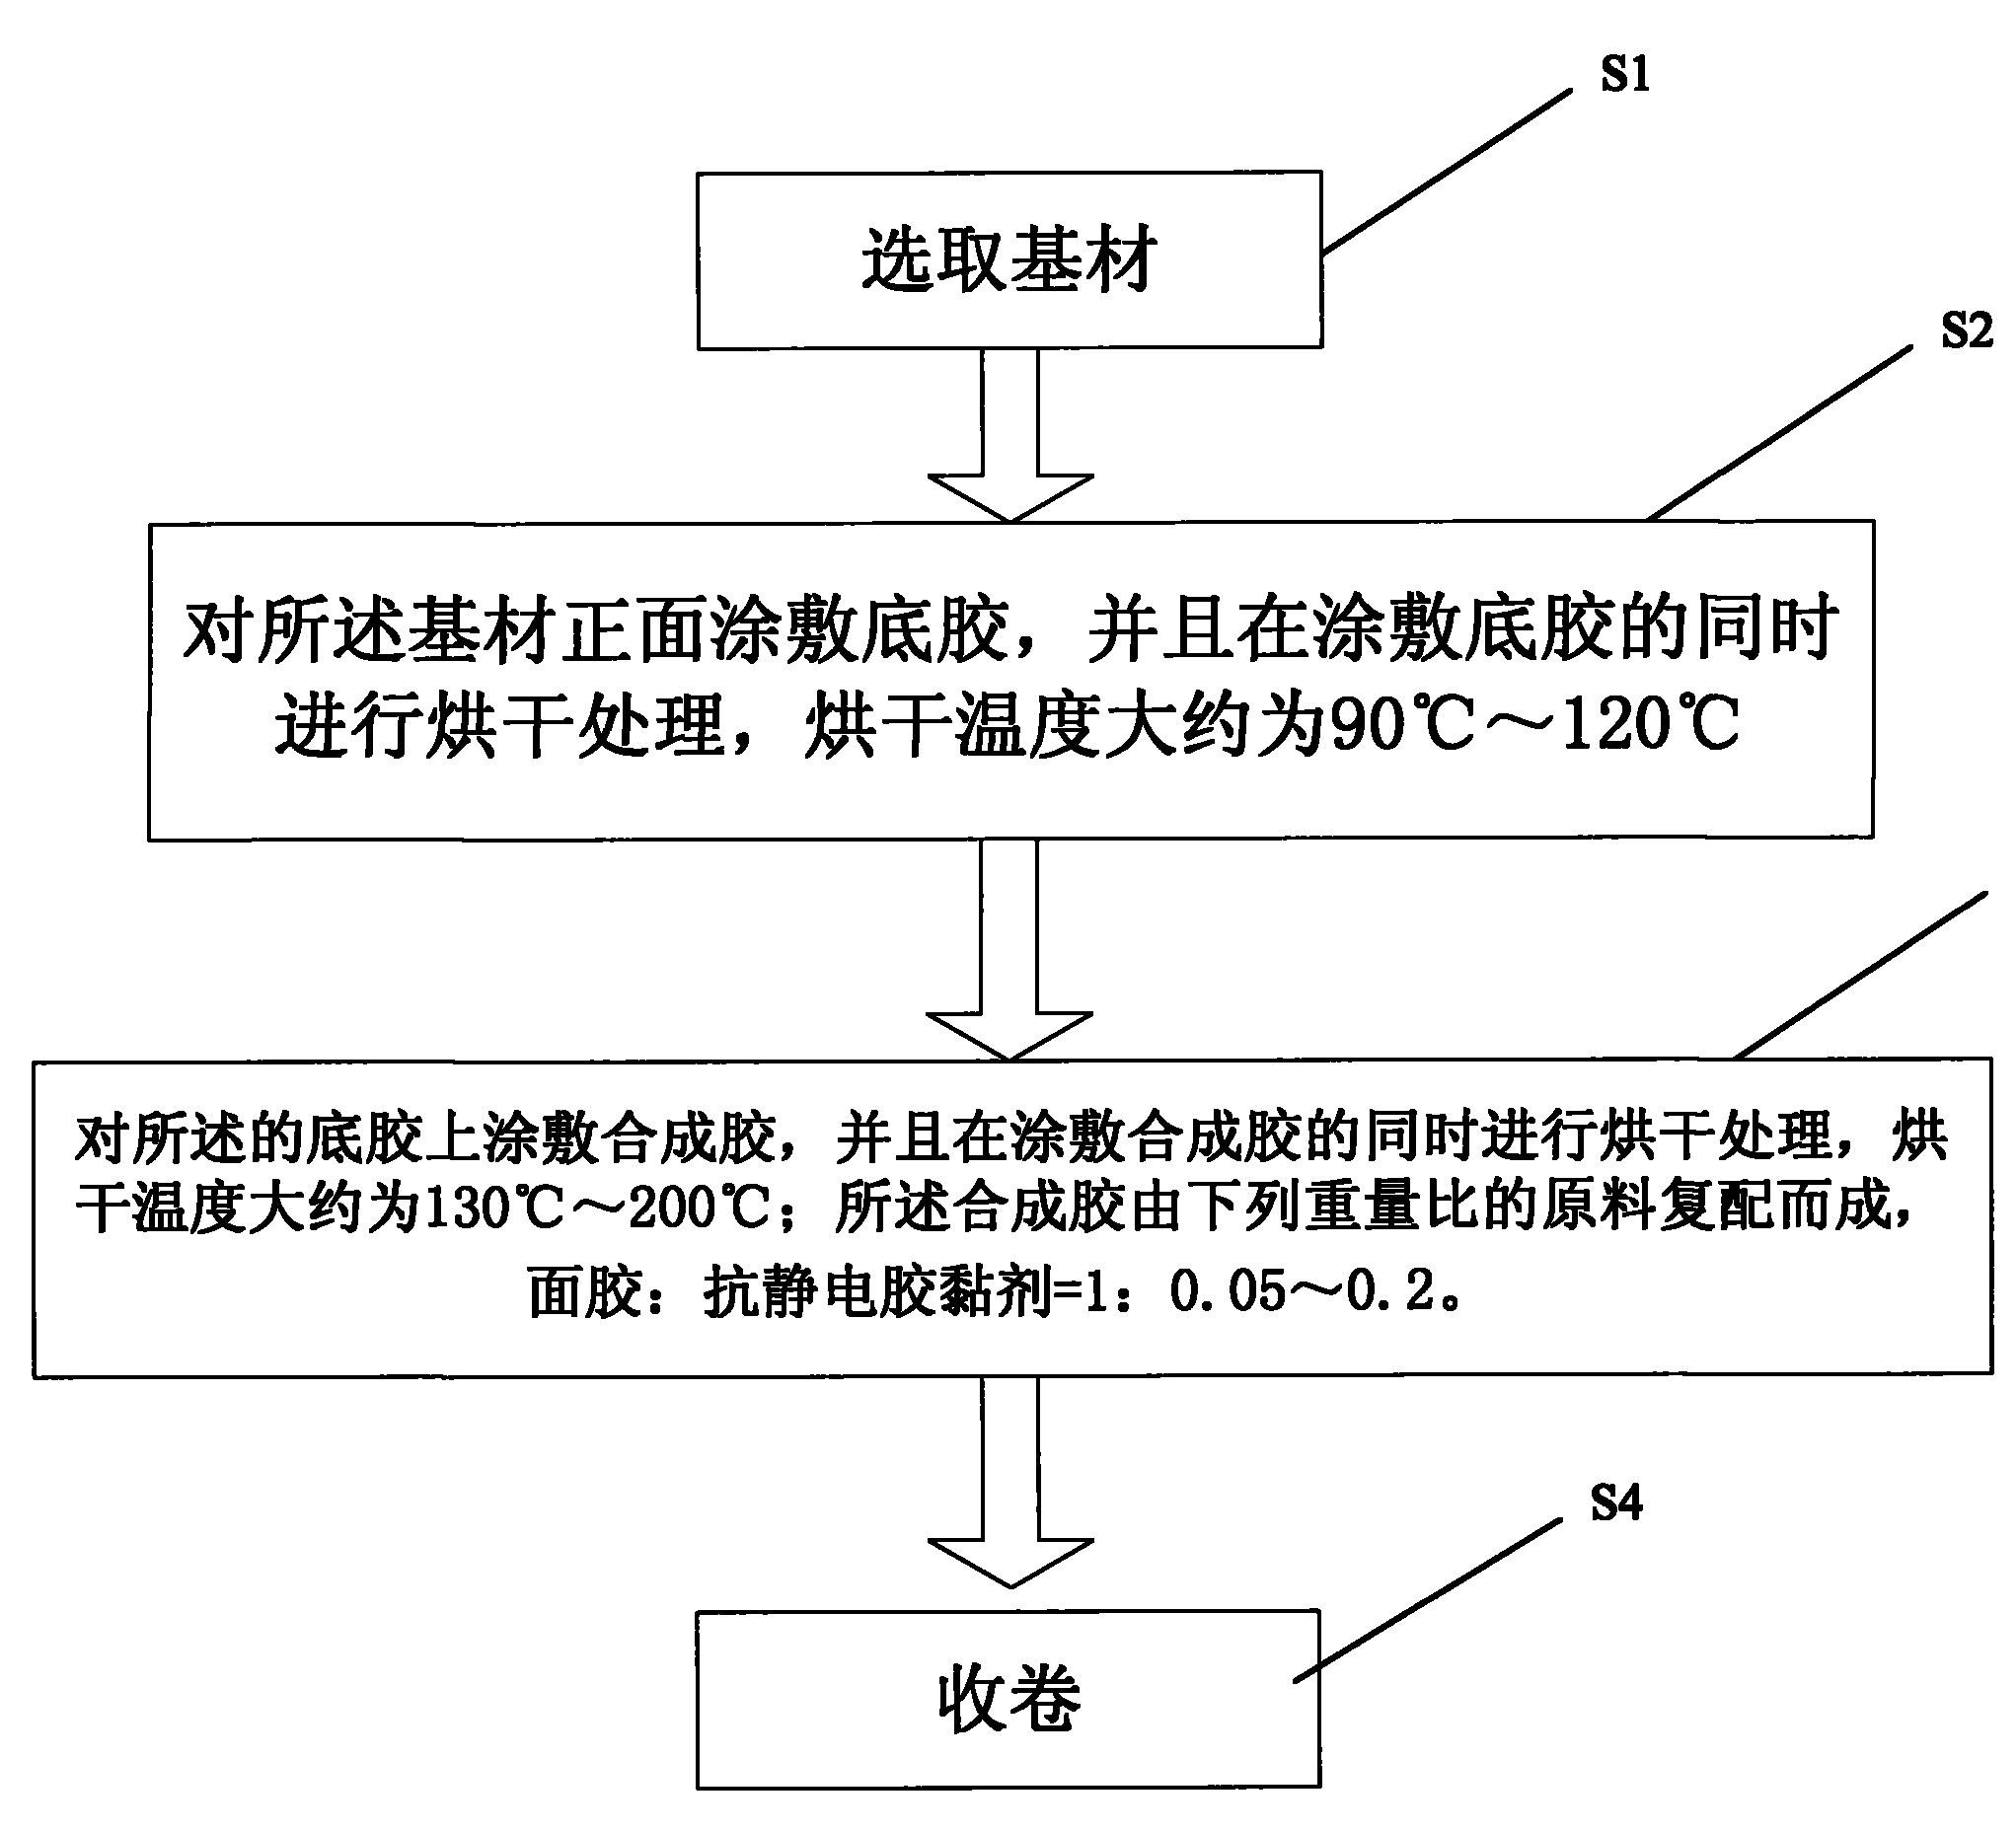 Processing method of antistatic adhesive tapes